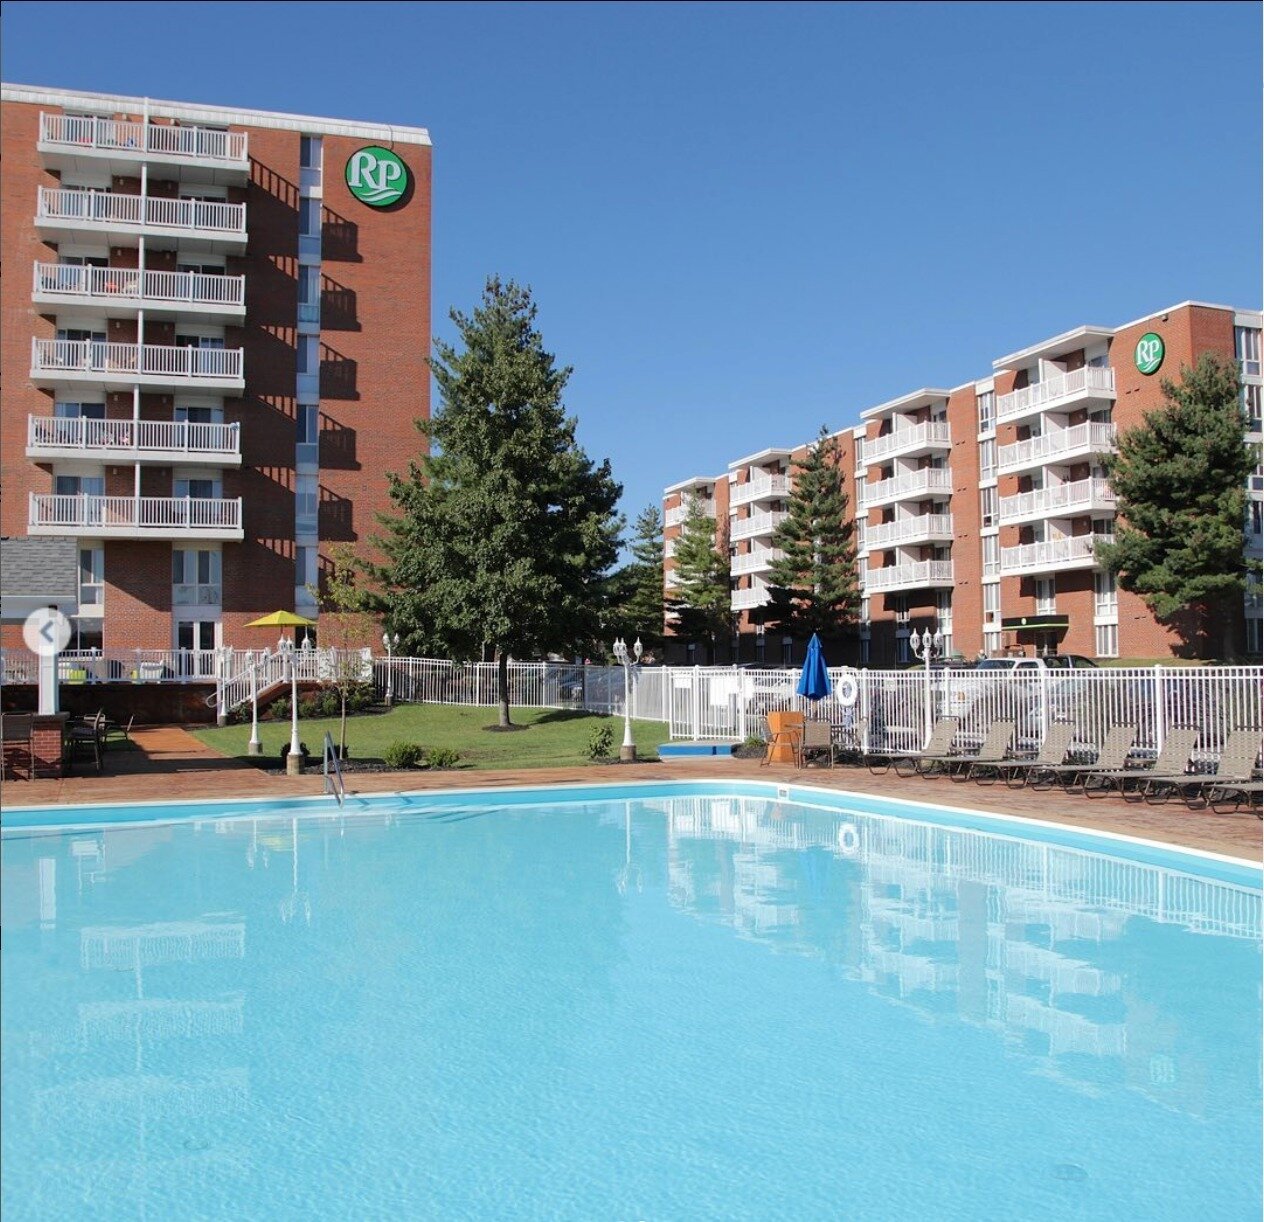 ☀️Take a swim at River Park pool!!👓️⁠
⁠
✨It's time for some poolside therapy ✨⁠
⁠
Grab some ice water on your way out or an iced coffee free to our residents! (just being a cup) 😊⁠
⁠
#studenthousing #riverparkou #poolside